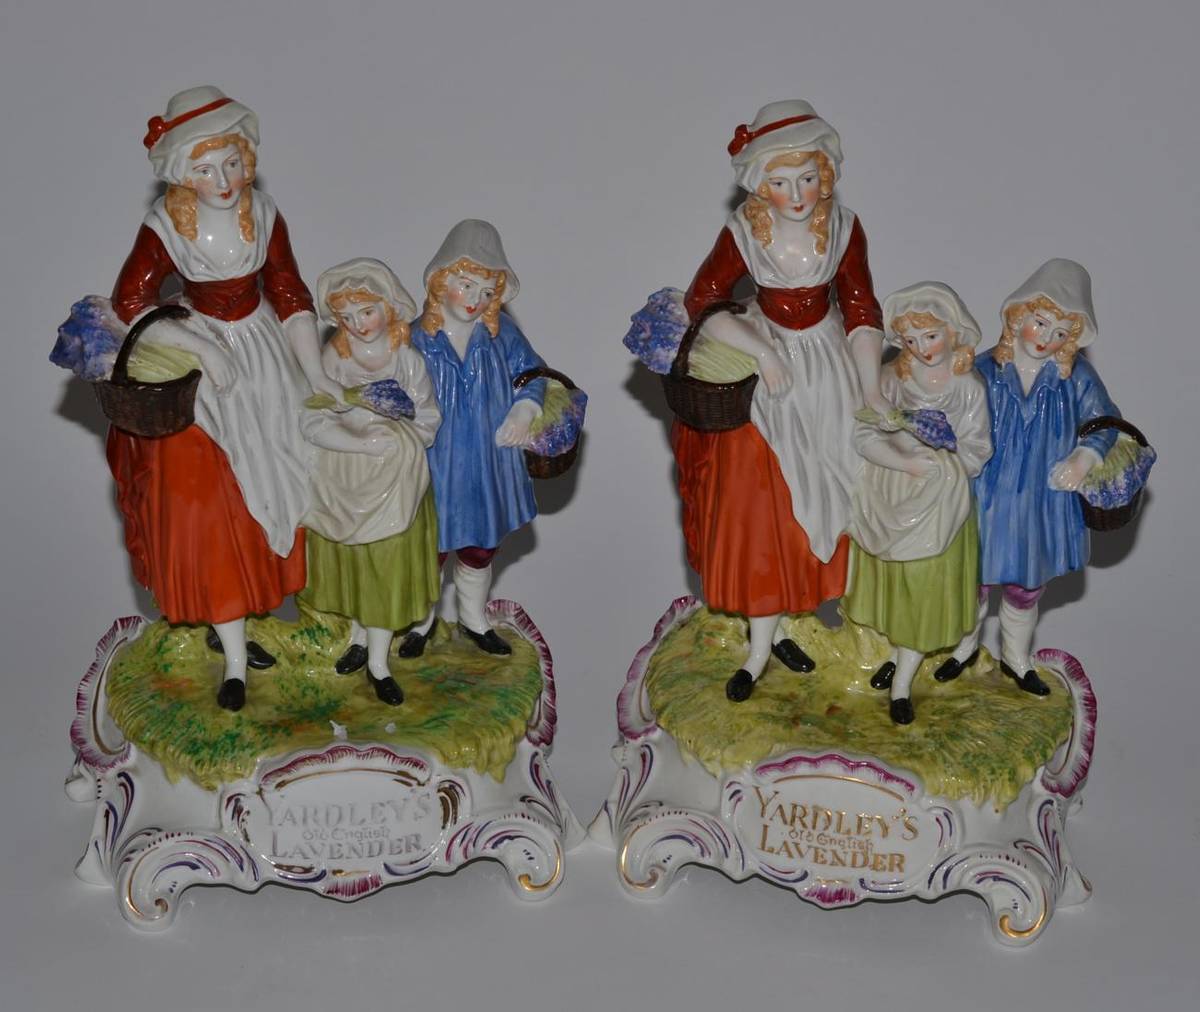 Lot 16 - A pair of Yardley's figurines